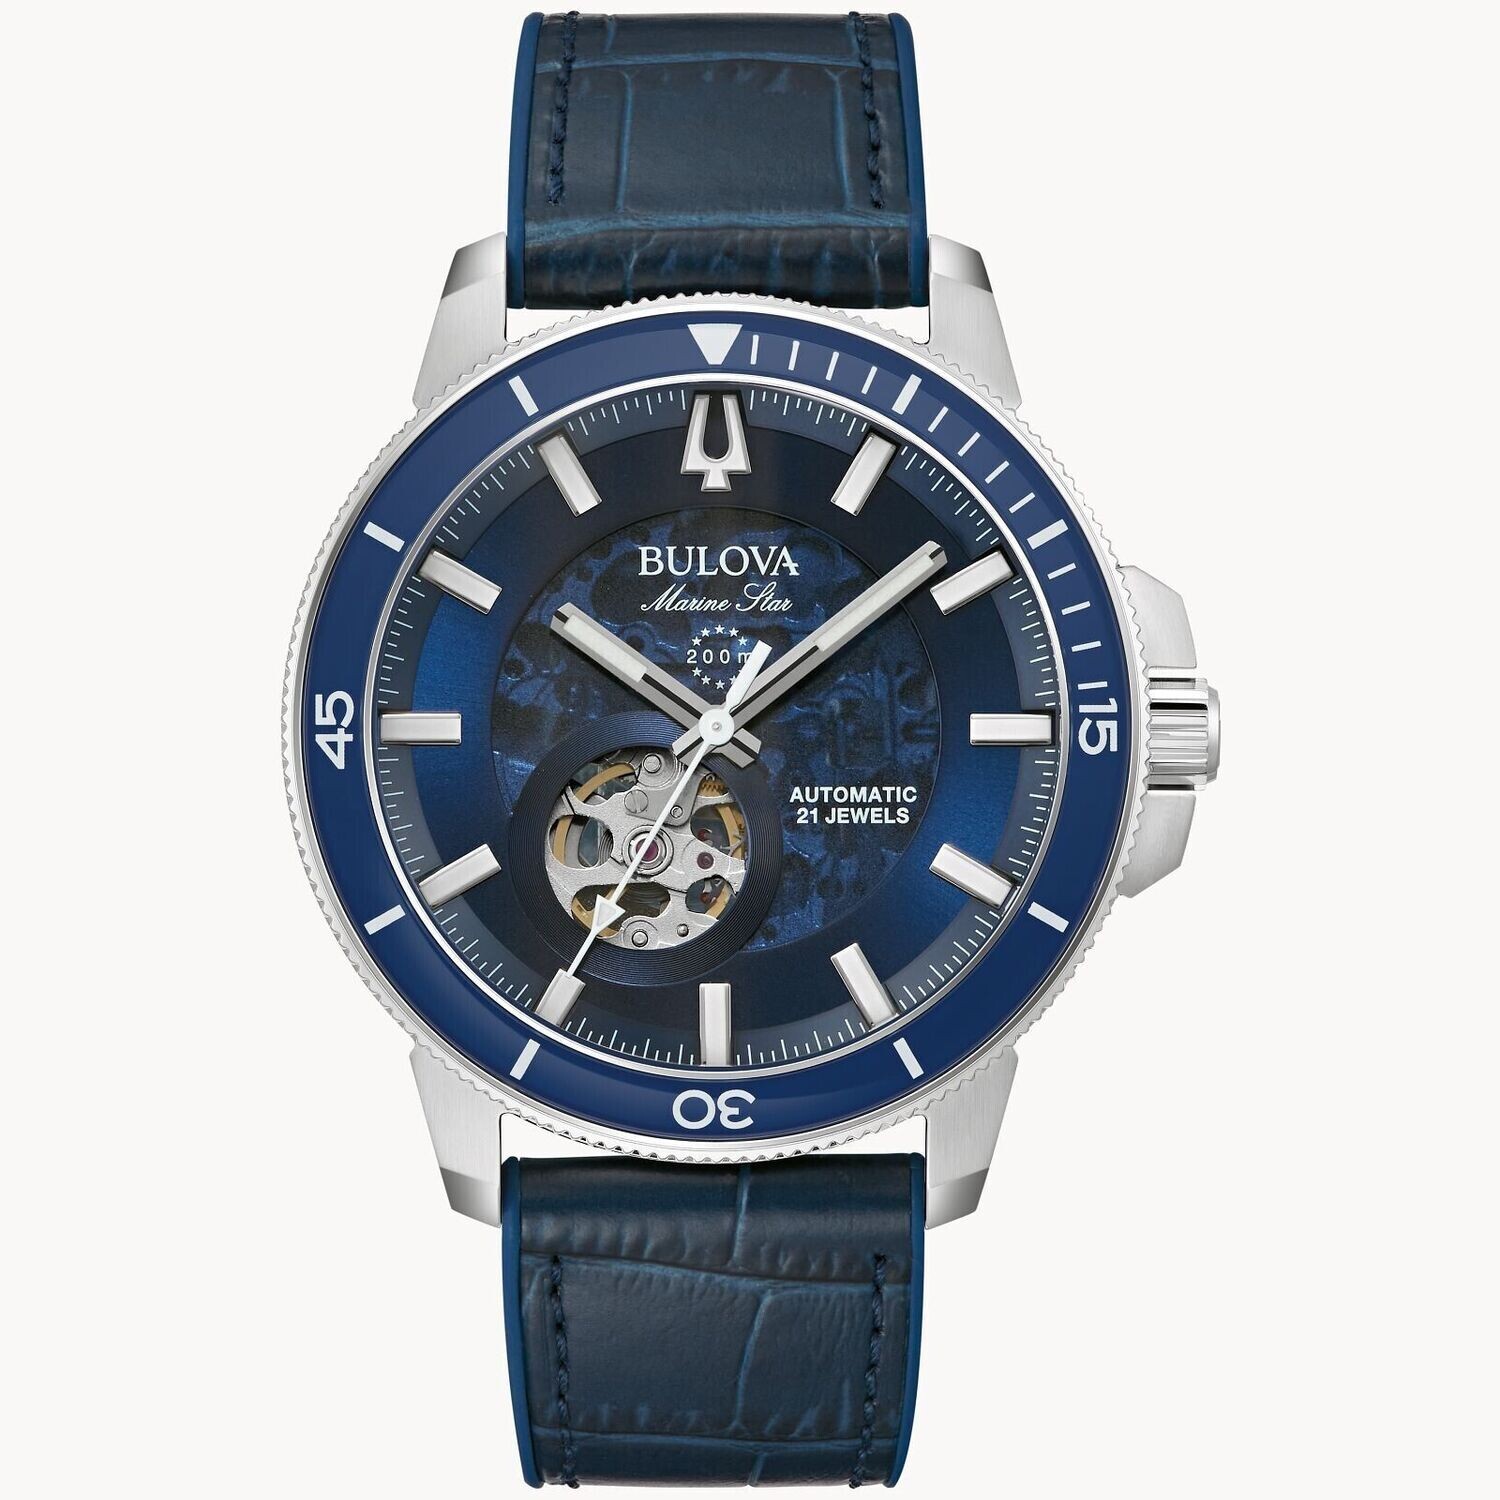 Bulova MARINE STAR 96A291 45mm Automatic Bold At Heart Skeleton 200m WR alligator leather band automatic men's watch